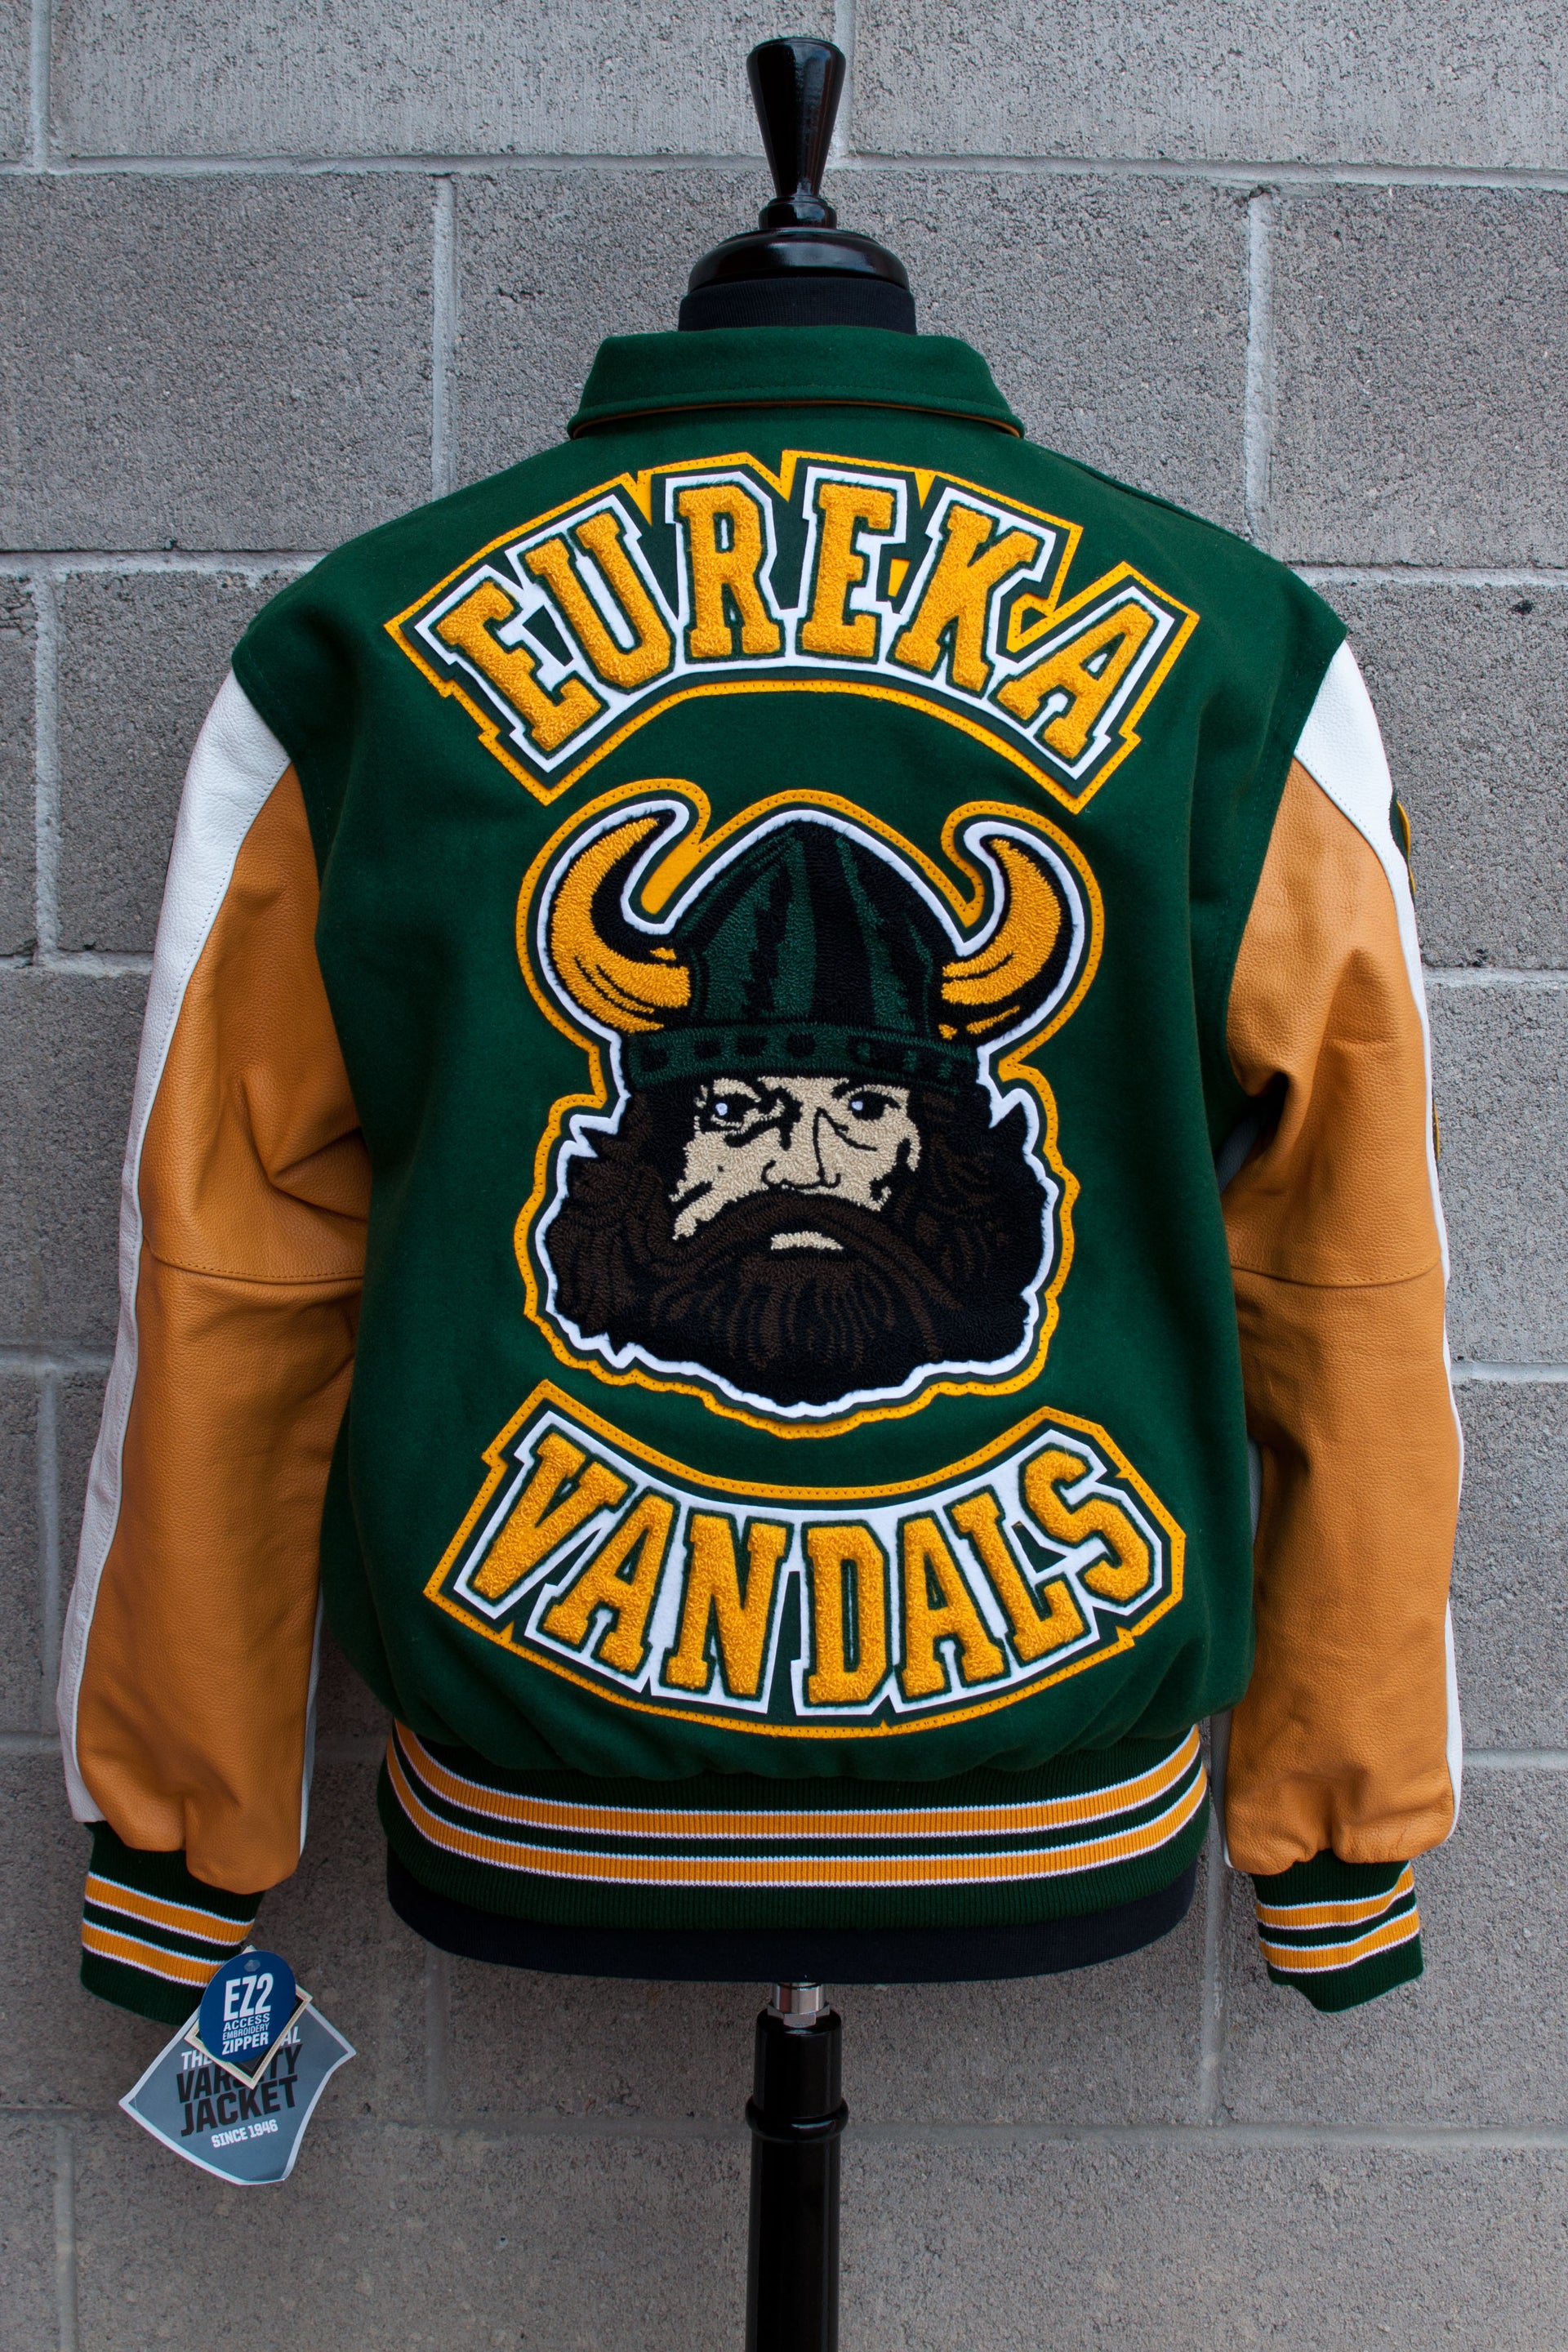 Royal Blue Letterman Jacket with Gold Leather Sleeves - Graduation